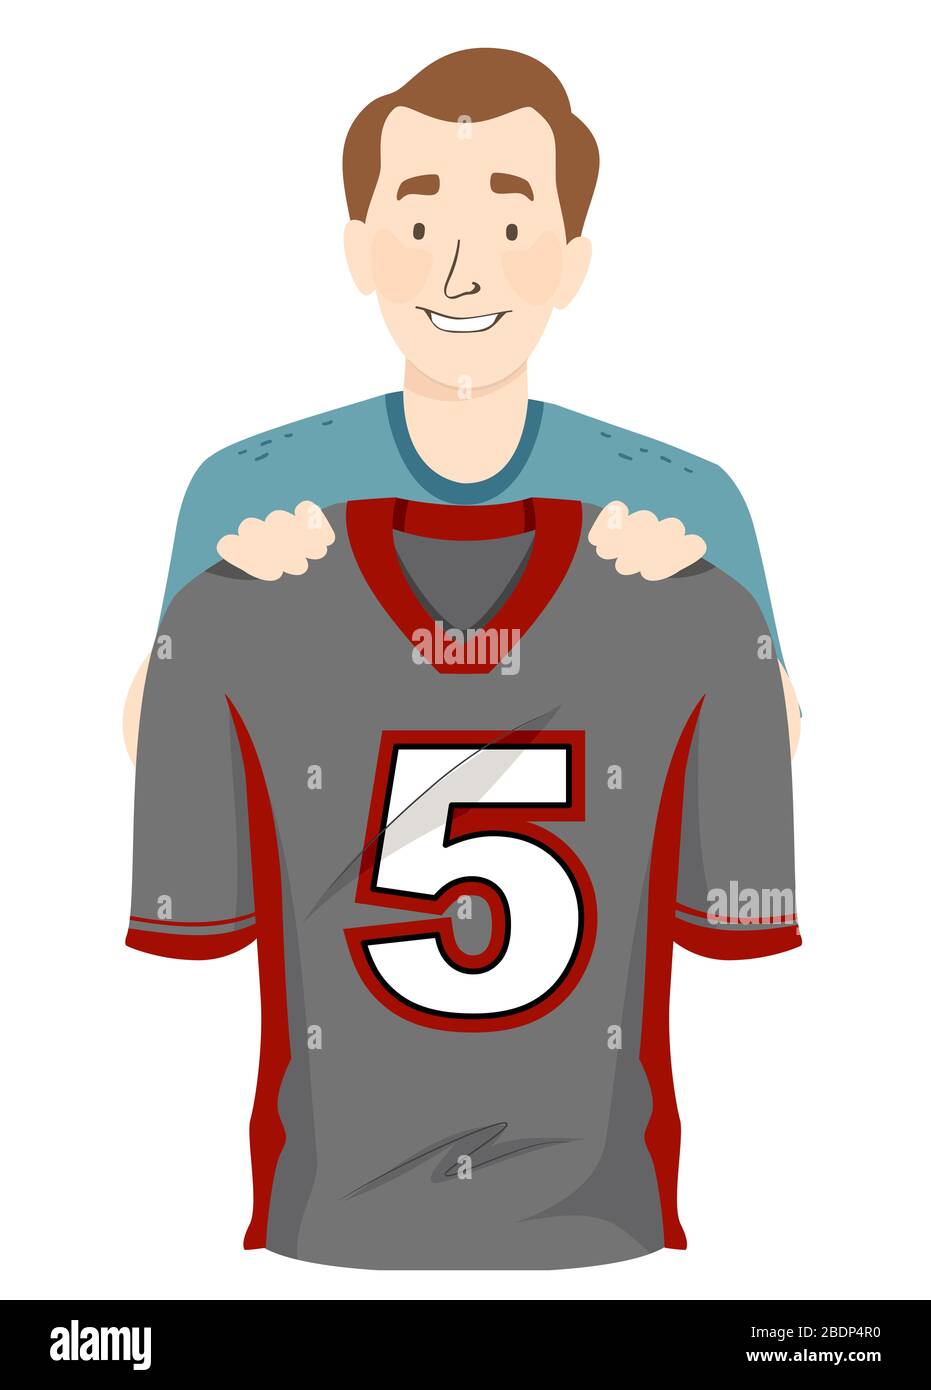 Illustration of a Man Holding His Football Jersey Stock Photo - Alamy